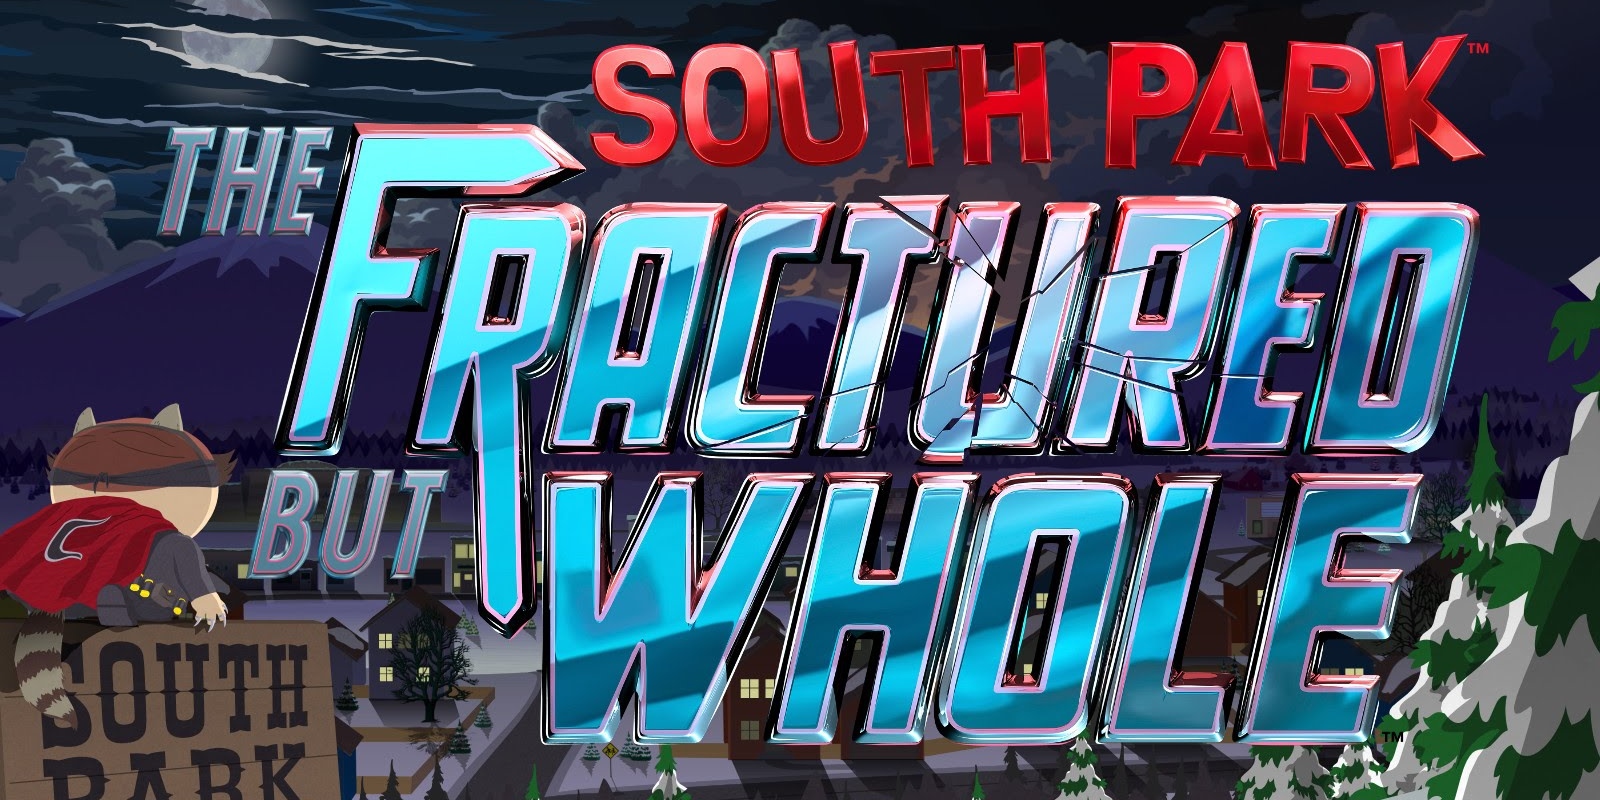 Whole game. Купить аккаунт South Park the Fractured but whole. Fox whole игра.